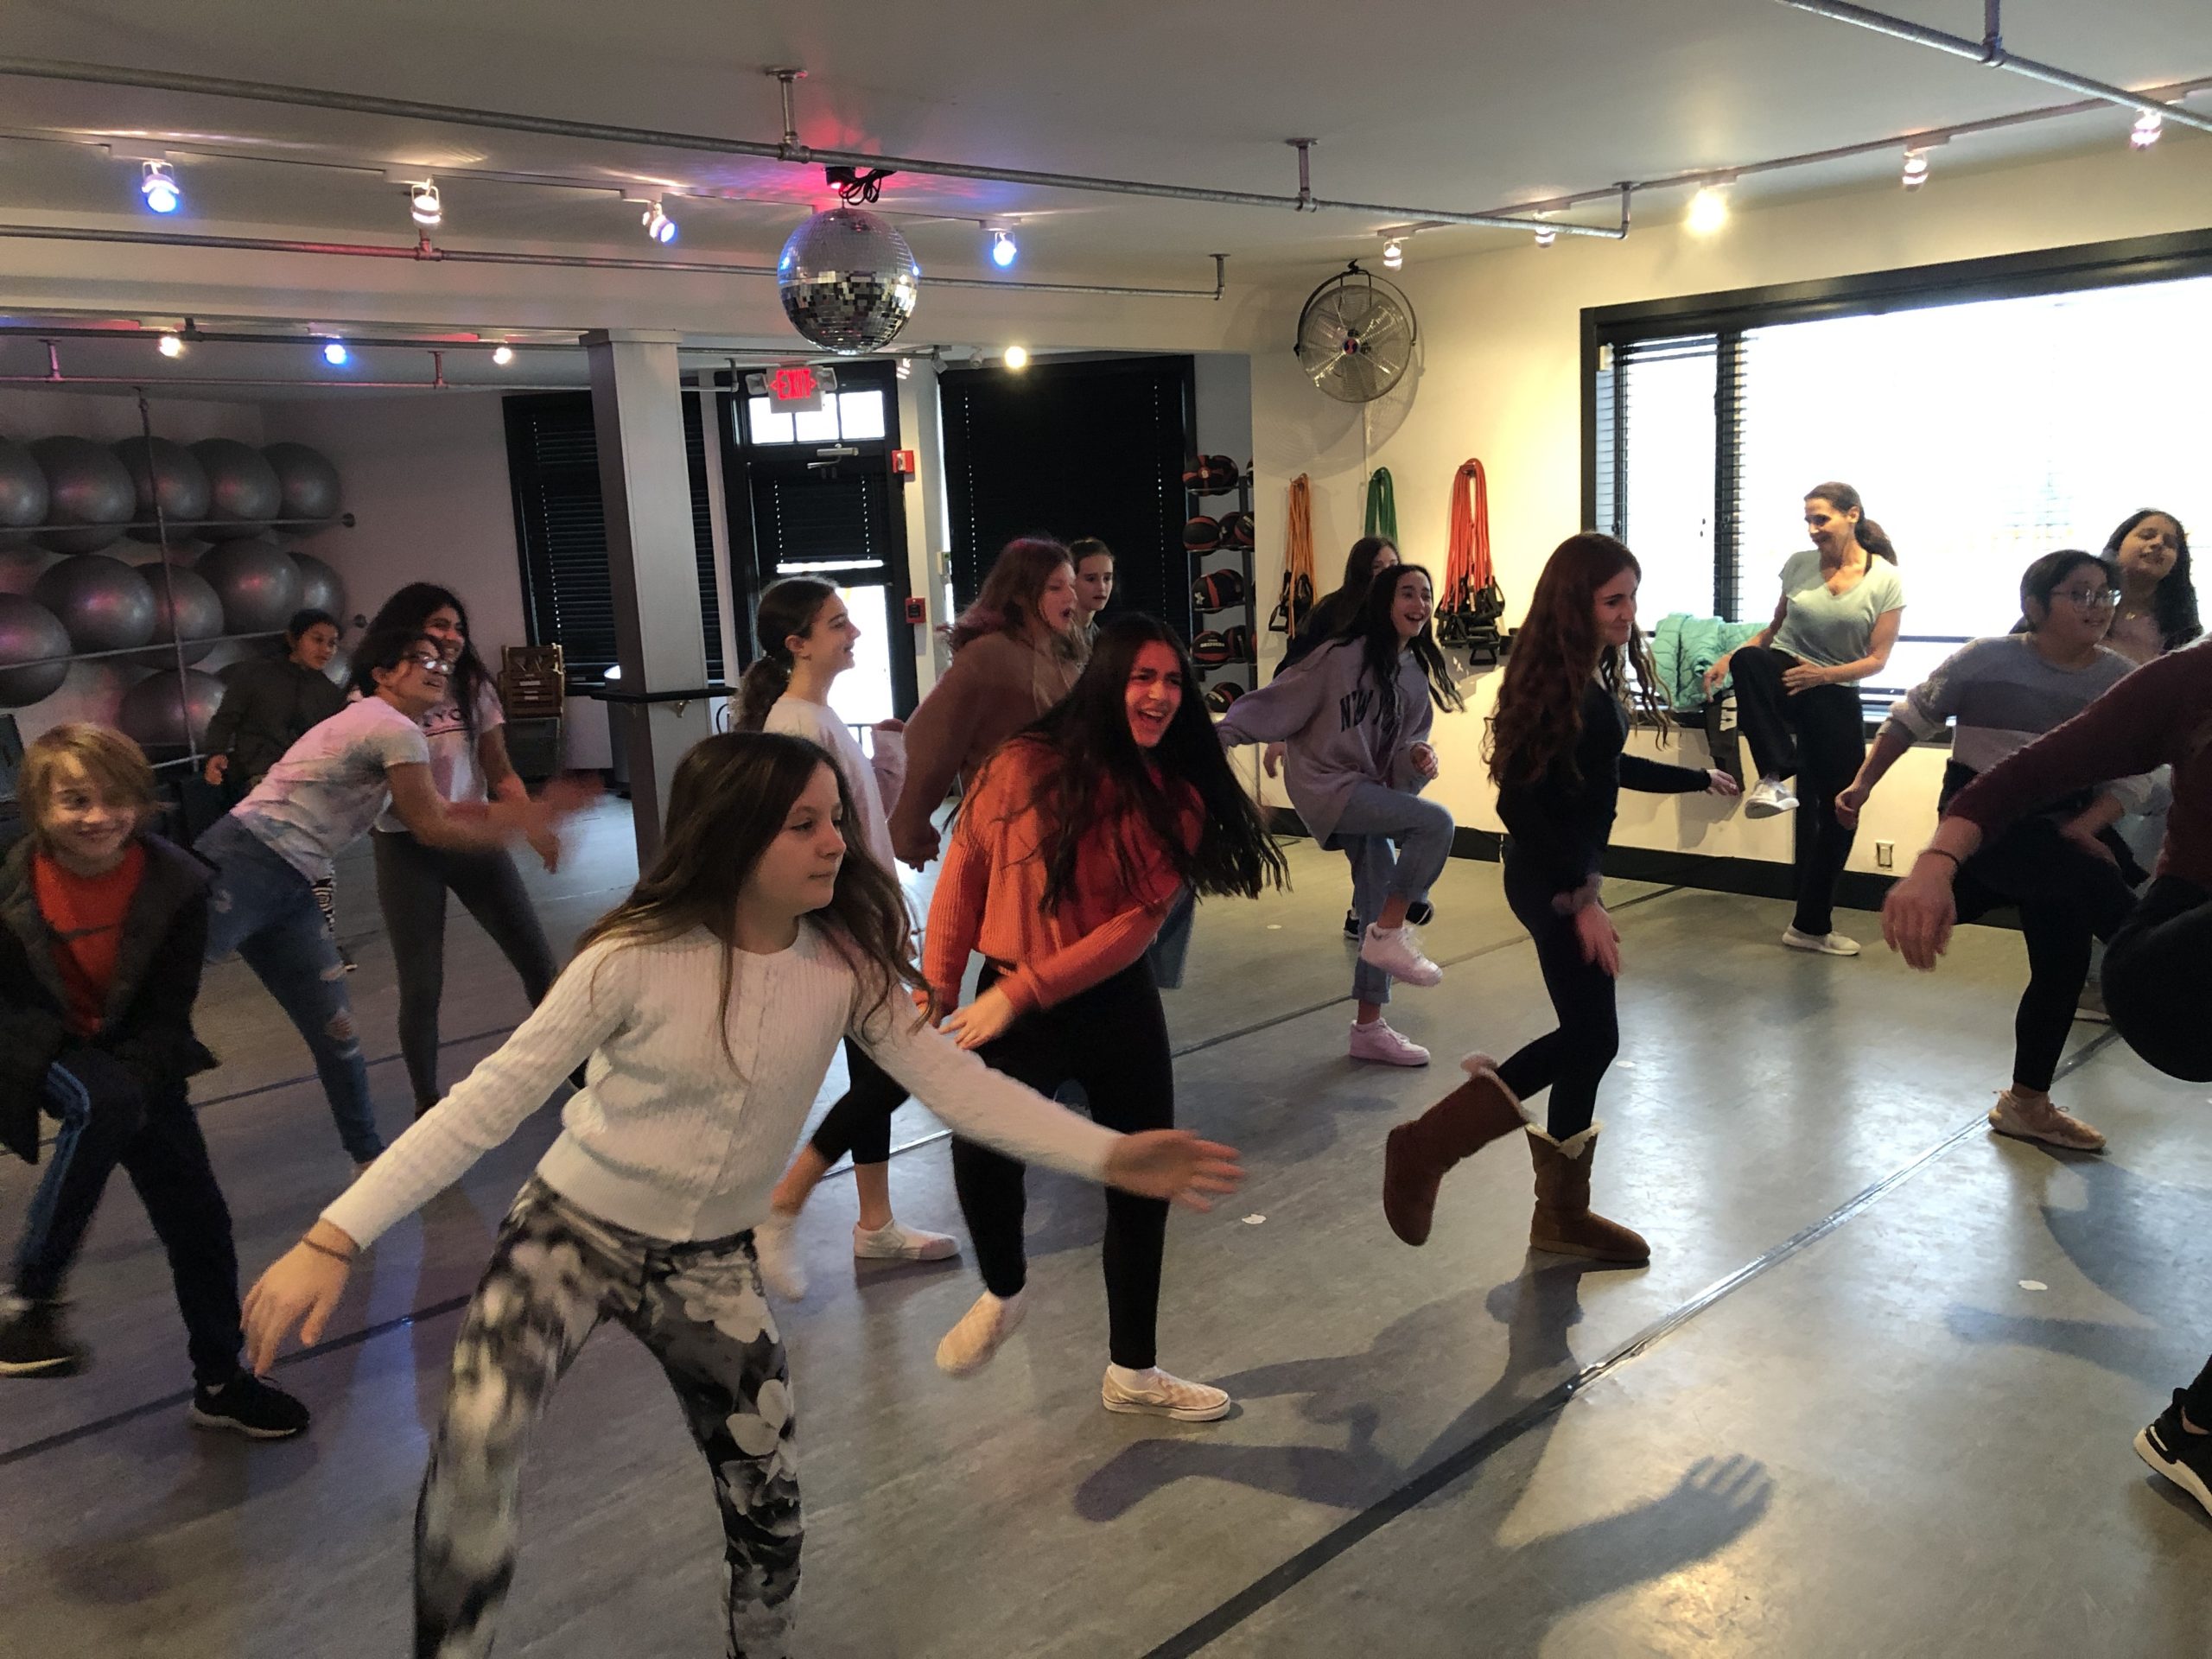 As part of their study of neuroplasticity in PLANT class (Preparing Learners for a New Tomorrow), Pierson Middle School sixth-graders are learning about the positive effects dancing can have on the brain and memory. To gain a firsthand experience, teacher Eileen Caulfield’s students recently participated in a dance class at the AKT Studio in East Hampton.